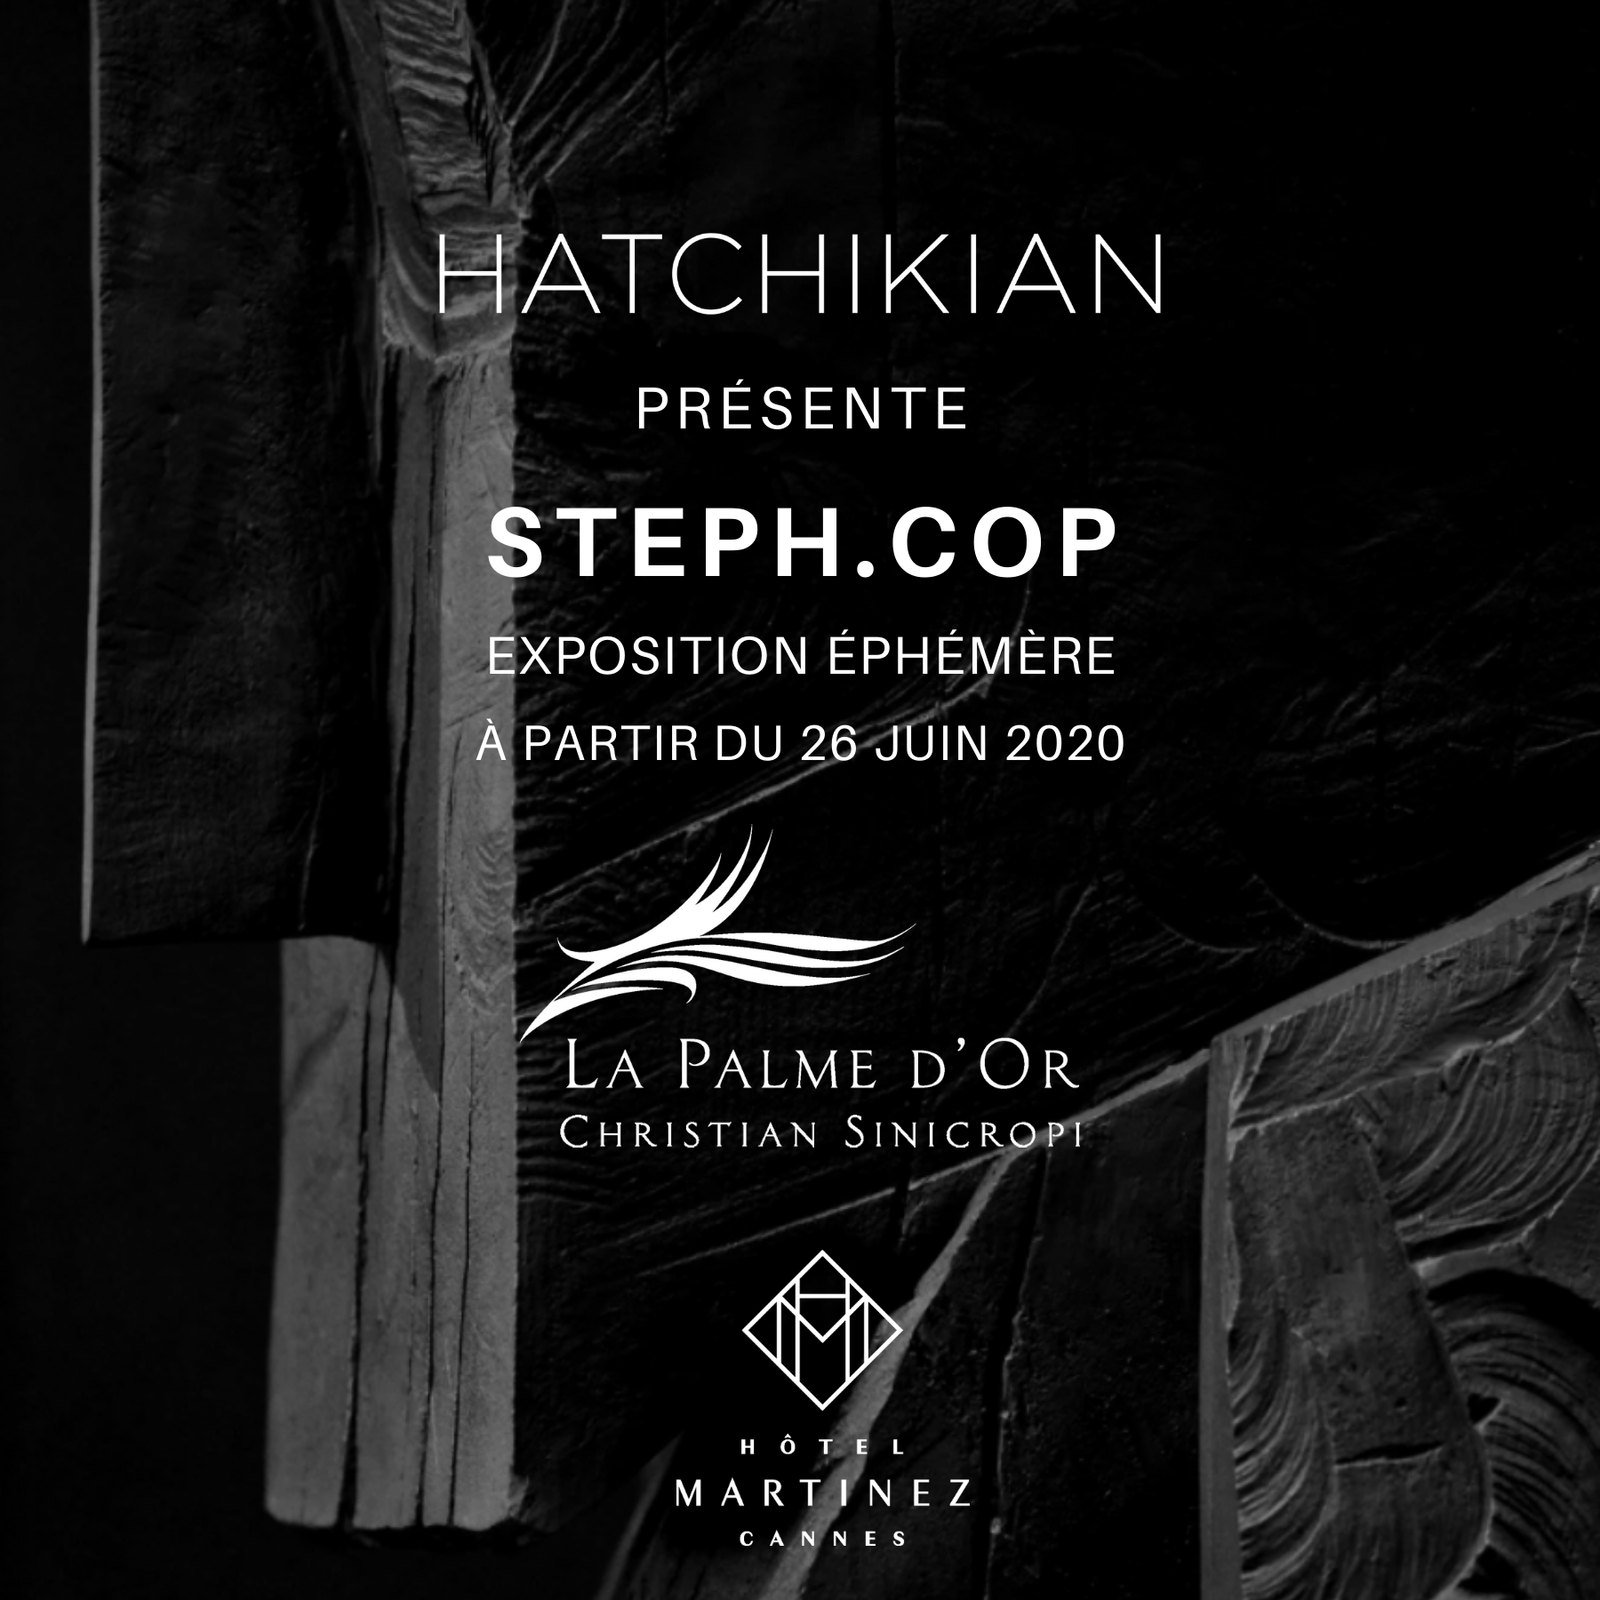 hatchikian-gallery-steph-cop-hotel-martinez-palme-d-or-christian-sinicropi-cannes-